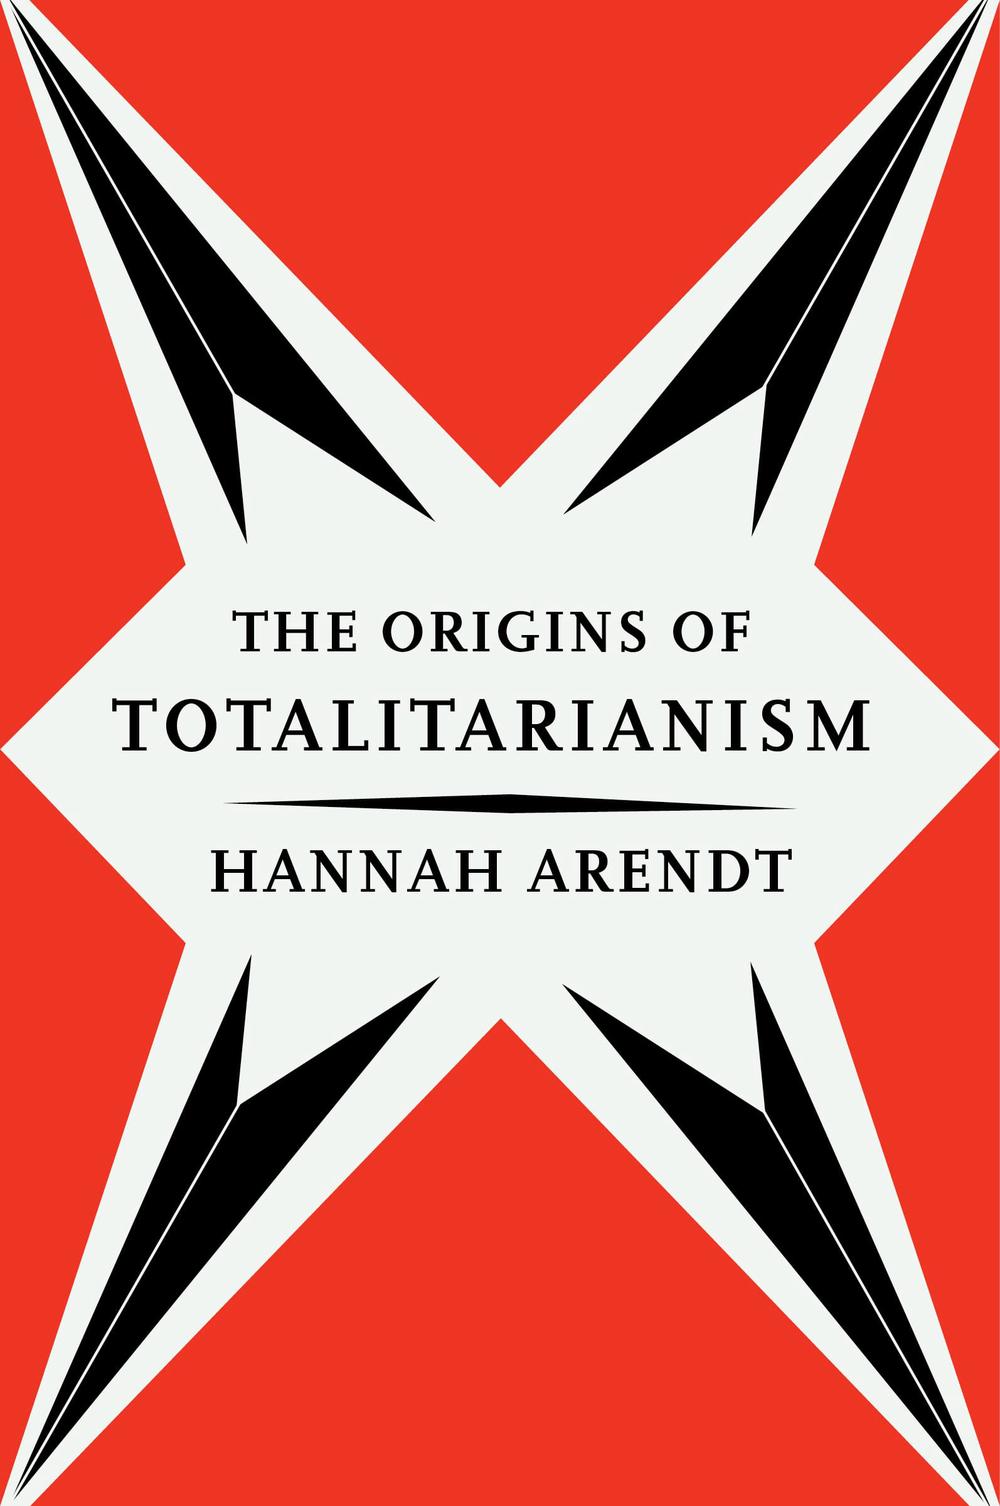 arendt hannah the origins of totalitarianism